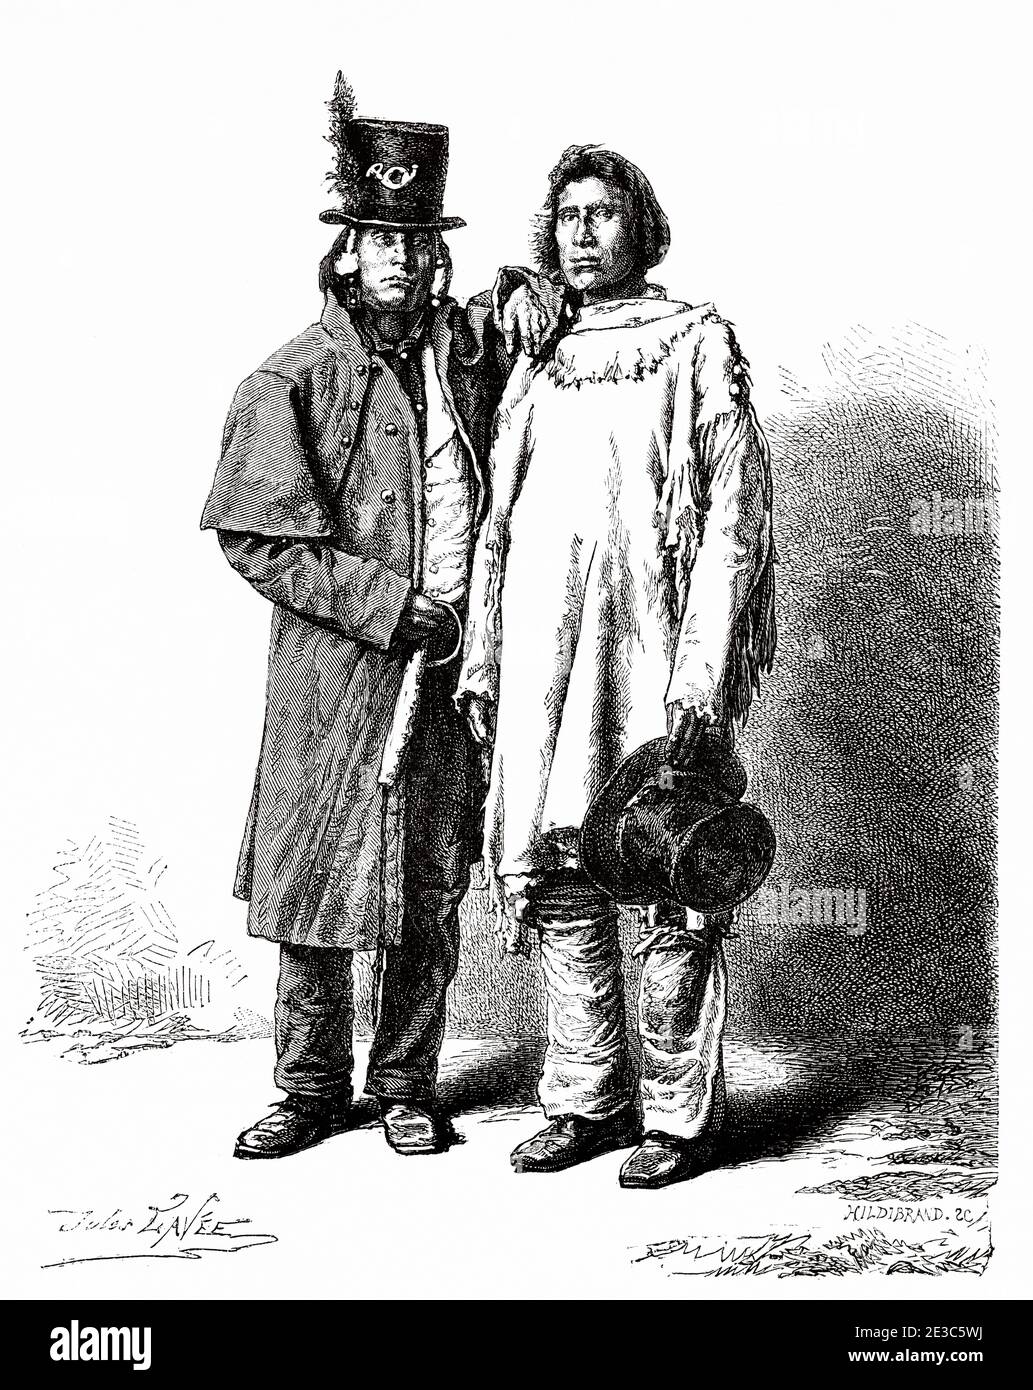 Indian snake chiefs of the tribe of the Goships, United States of America. Old 19th century engraved illustration. Travel from Washington to San Francisco by Louis Laurent Simonin from El Mundo en La Mano 1879 Stock Photo